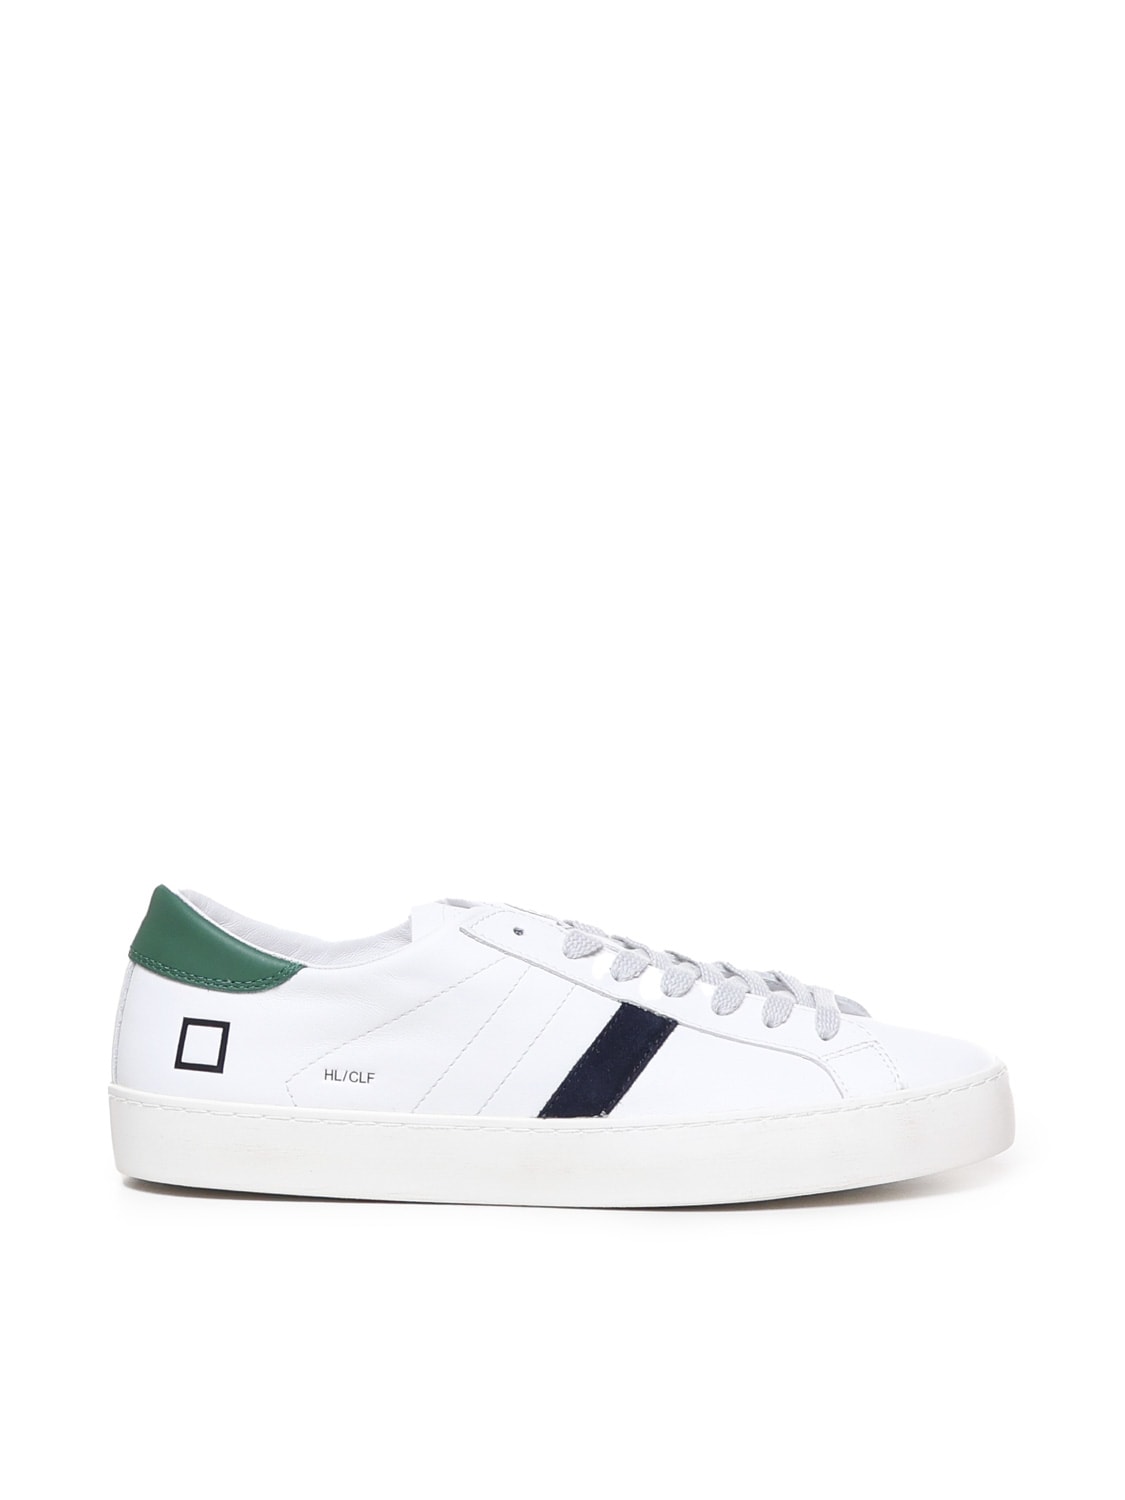 Shop Date Hill Low Sneakers In White-green